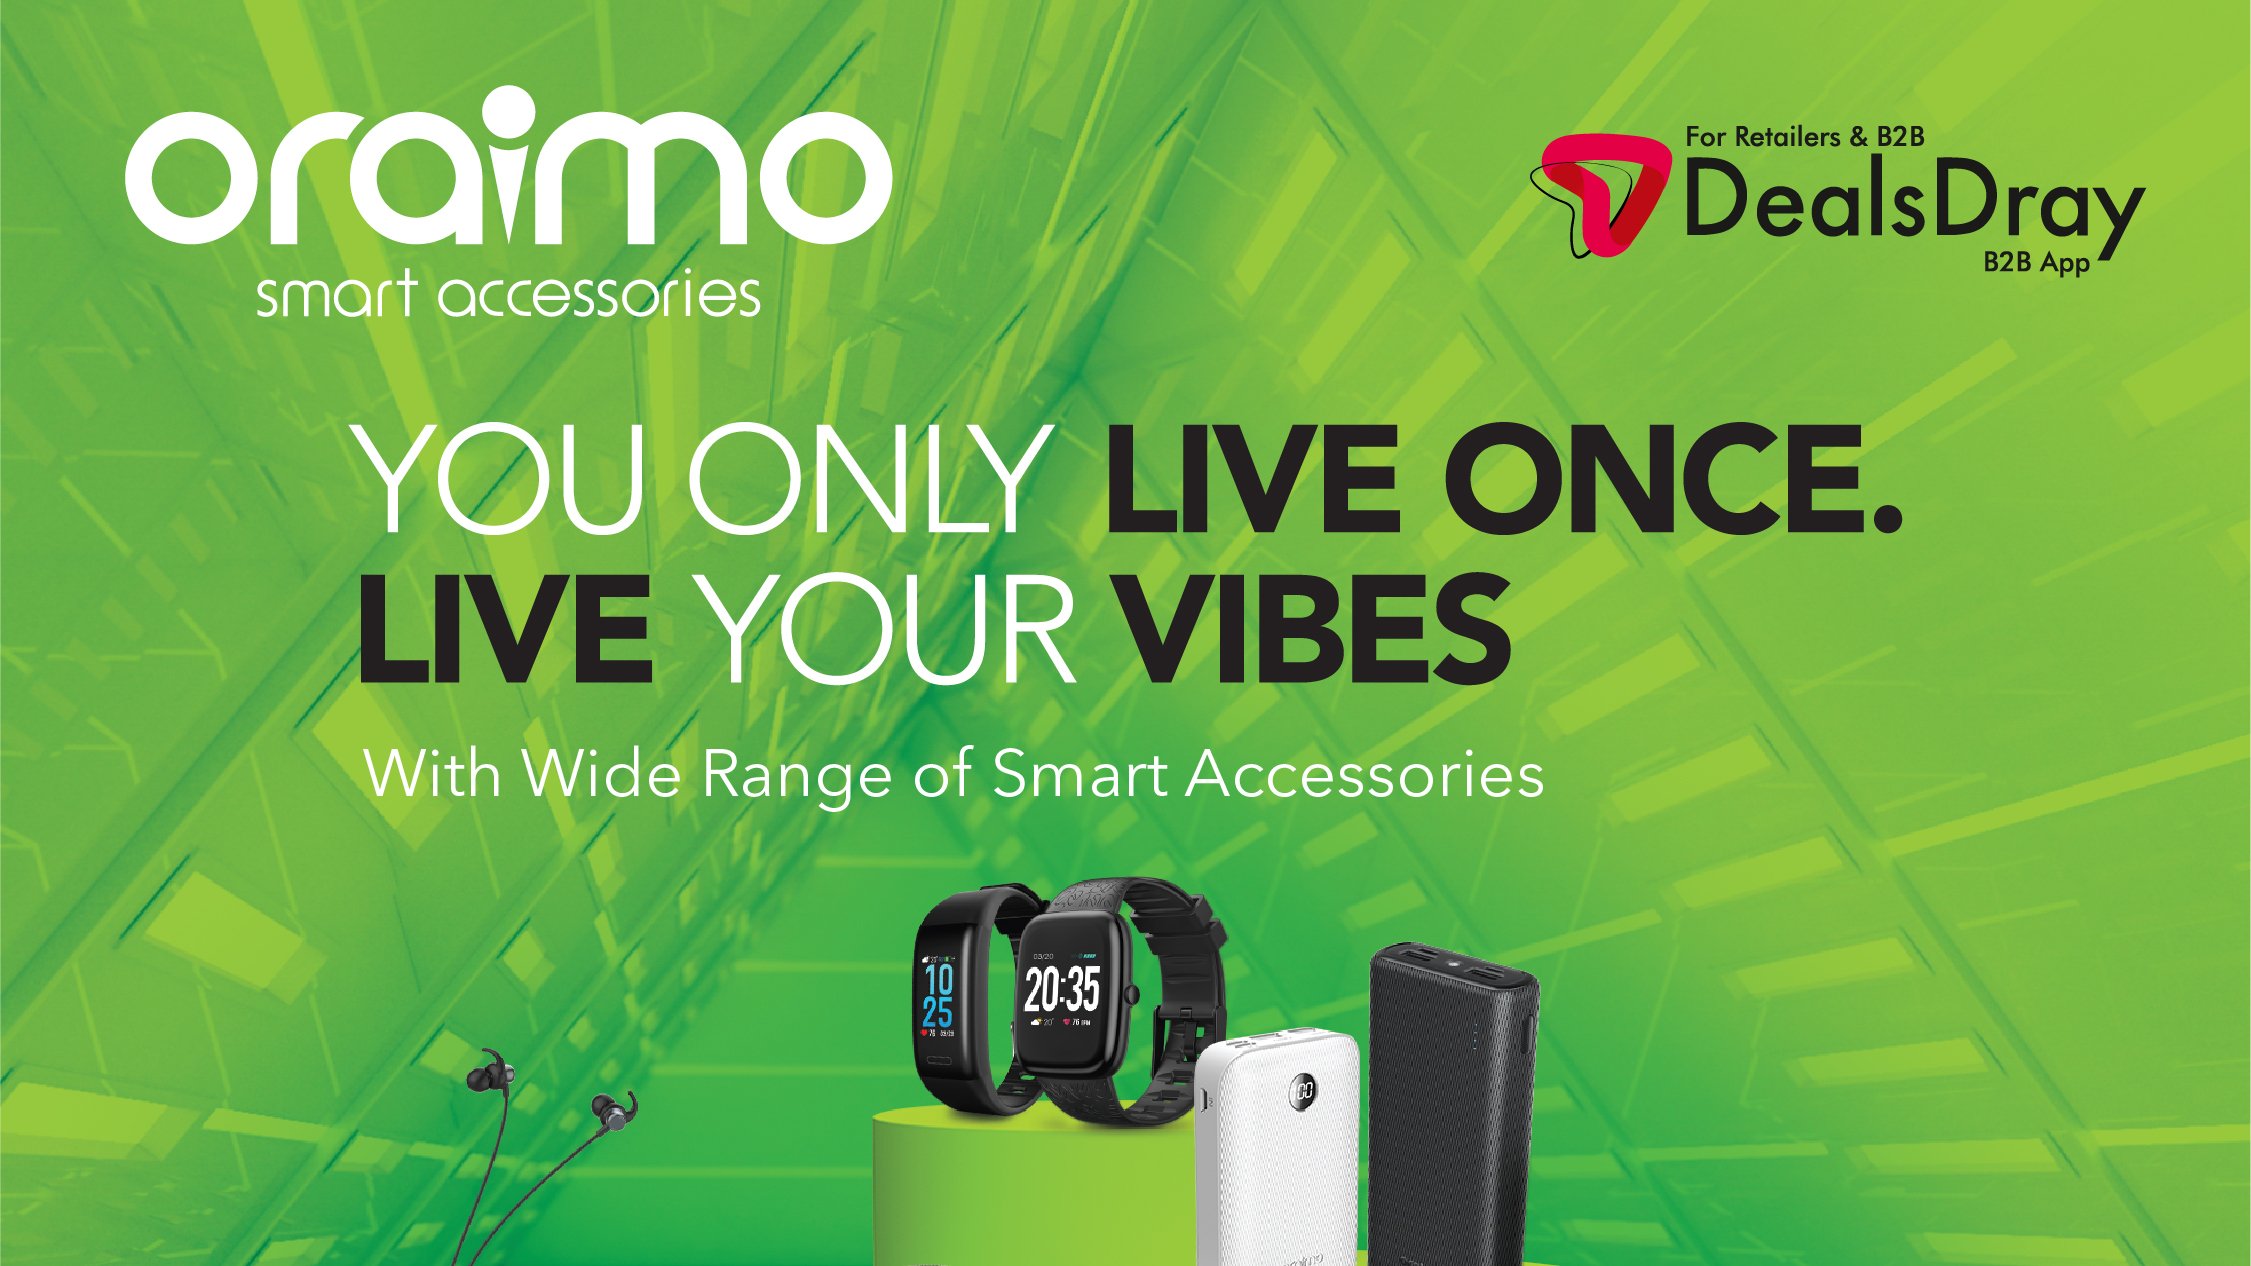 Majestætisk sy velfærd DealsDray a X: "A pleasure to partner with Oraimo - Transsion Holdings  Smart Accessories Brand for their accessories business expansion with  DealsDray B2B Ecommerce Platform in India's General Trade Channel.  #ecommerce #india #